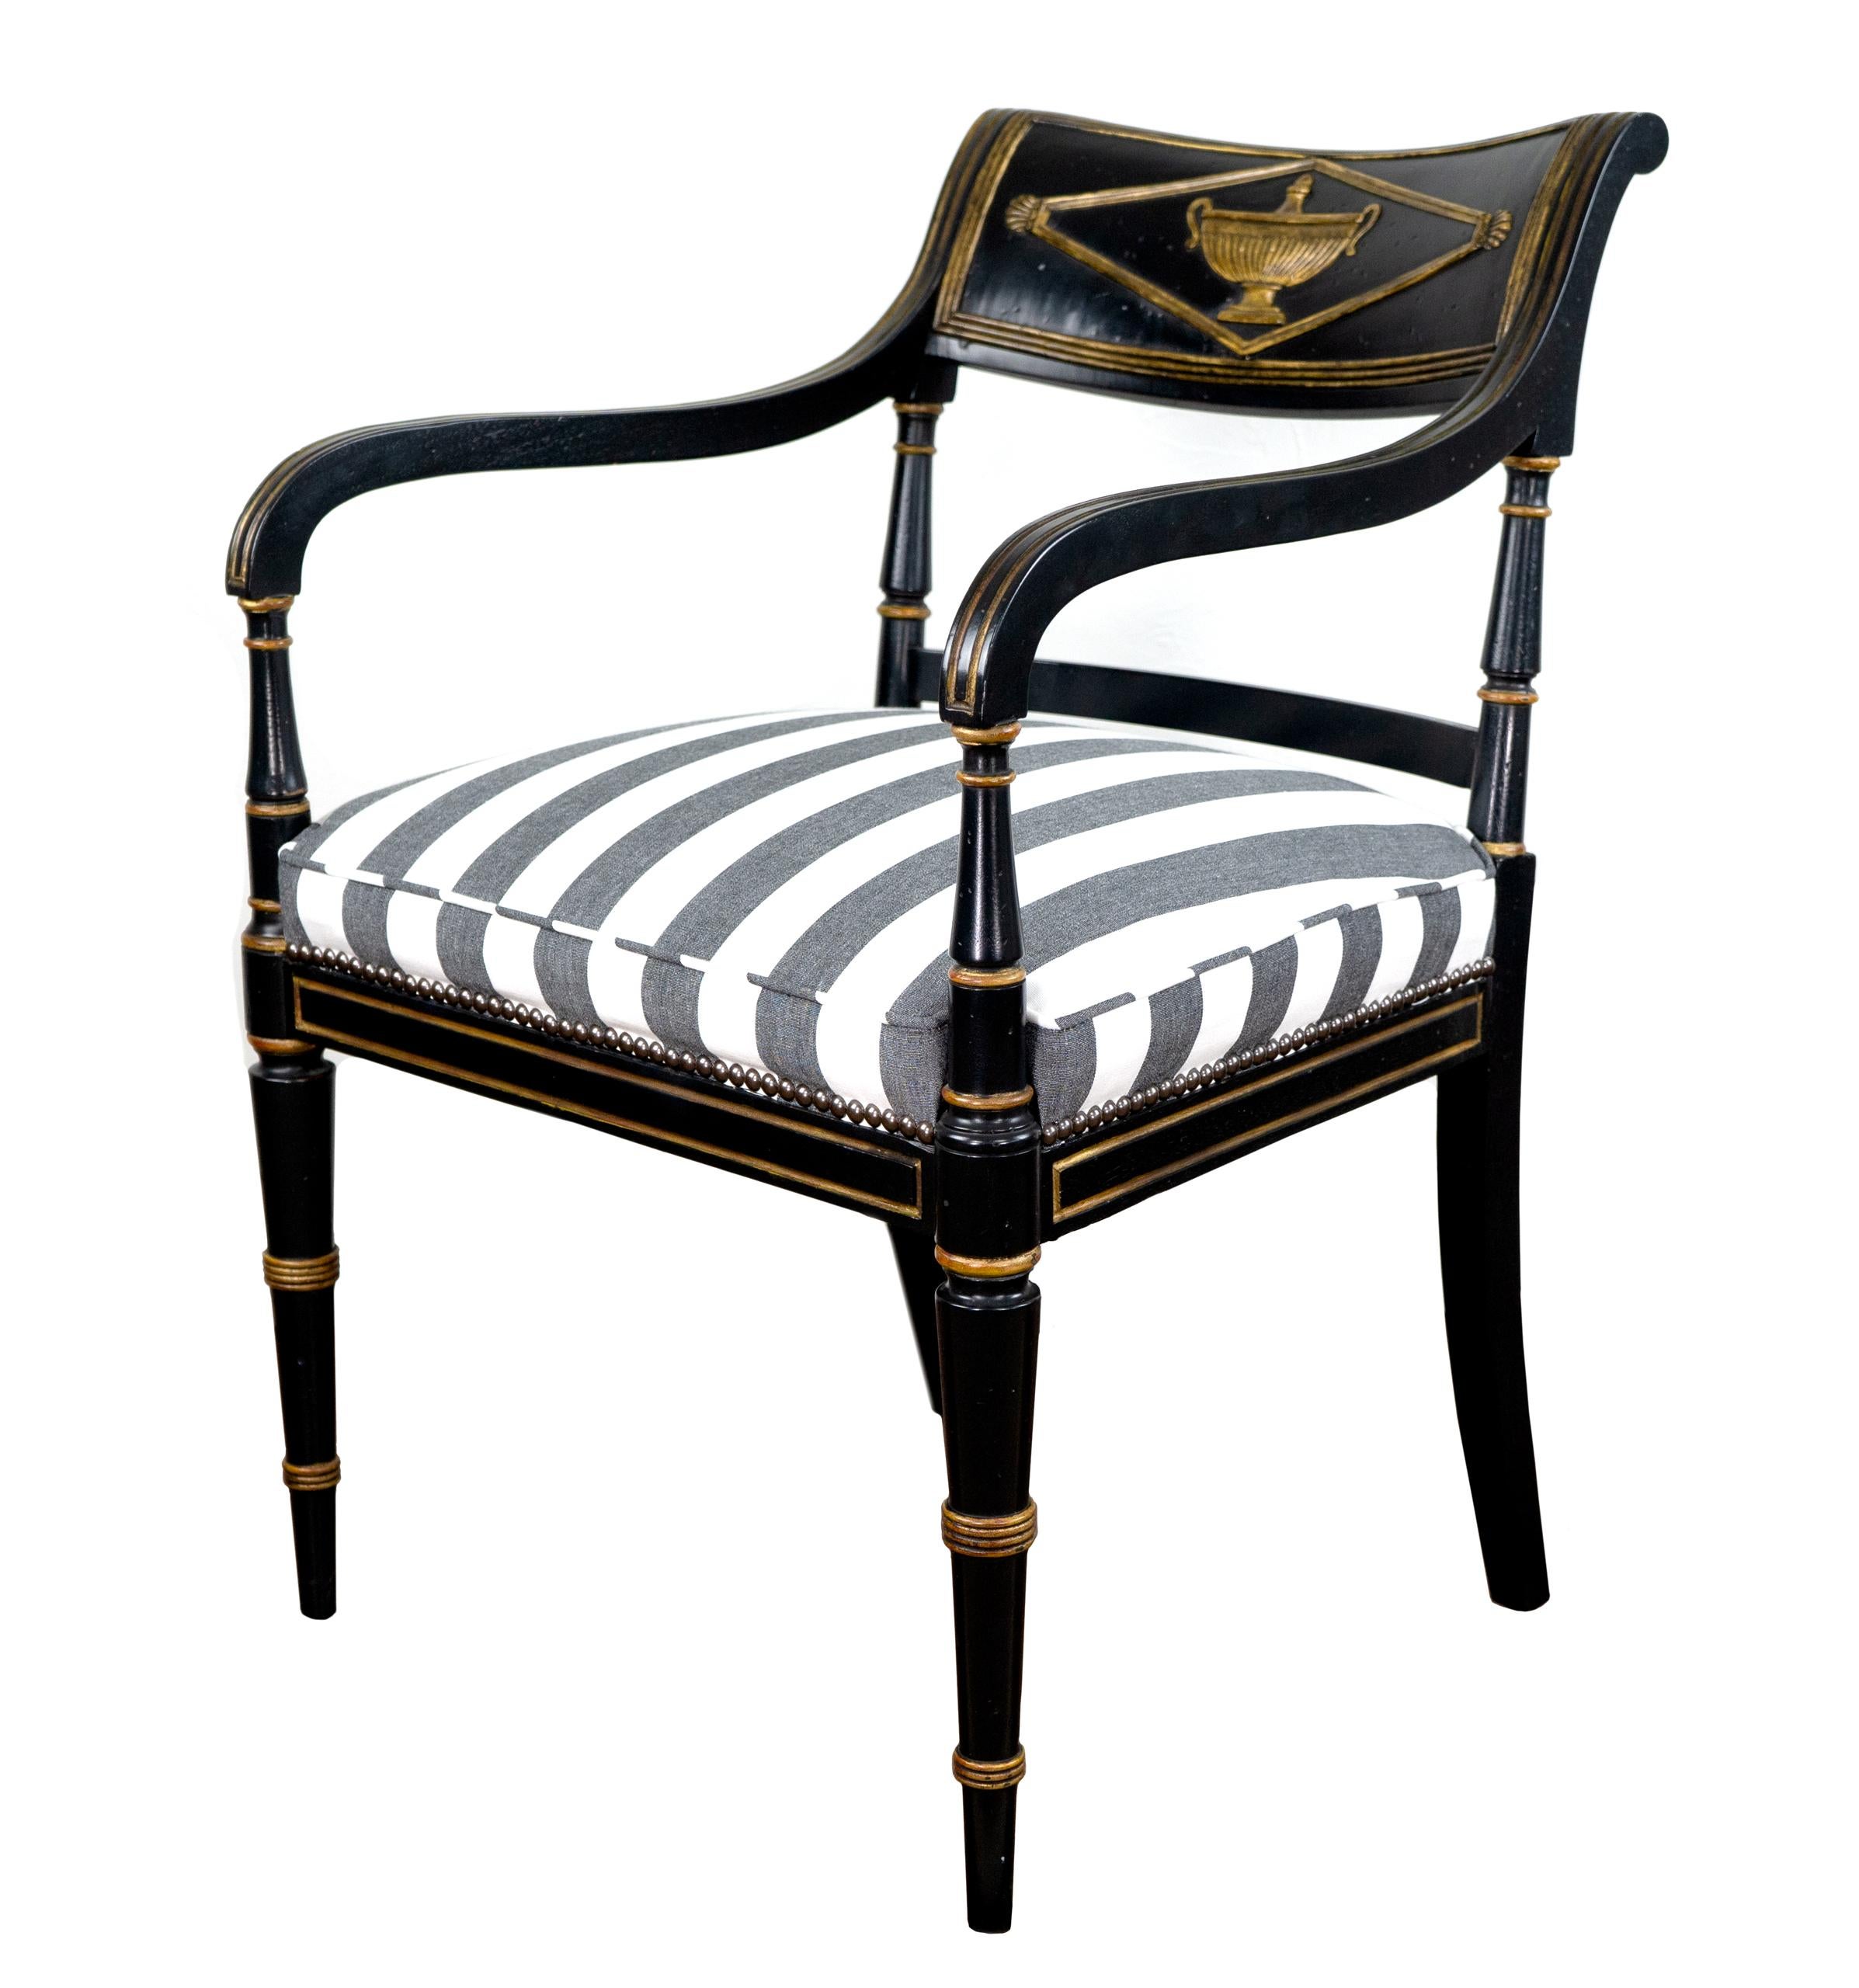 Beautiful set of 4 black painted chairs with gilding detail. 1930s empire style with new striped upholstery. The chairs are in great condition.